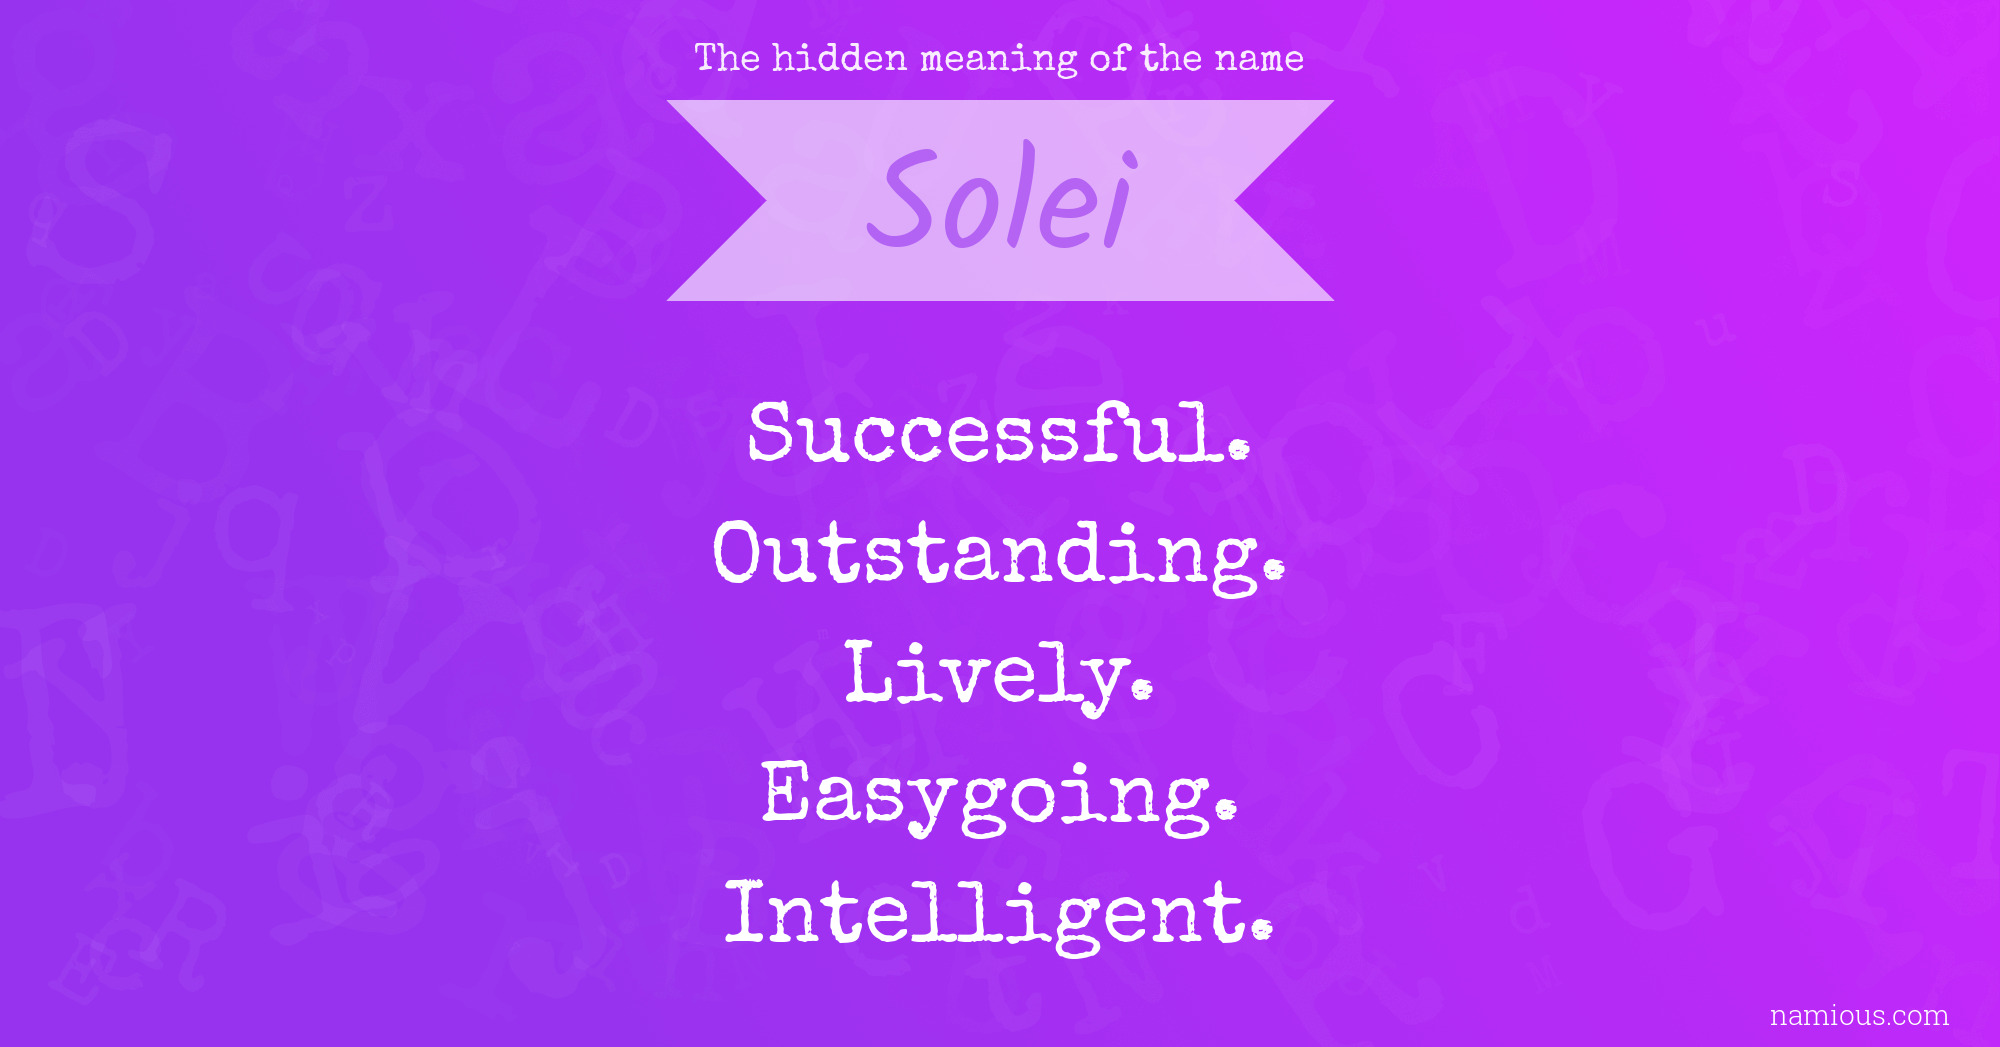 The hidden meaning of the name Solei